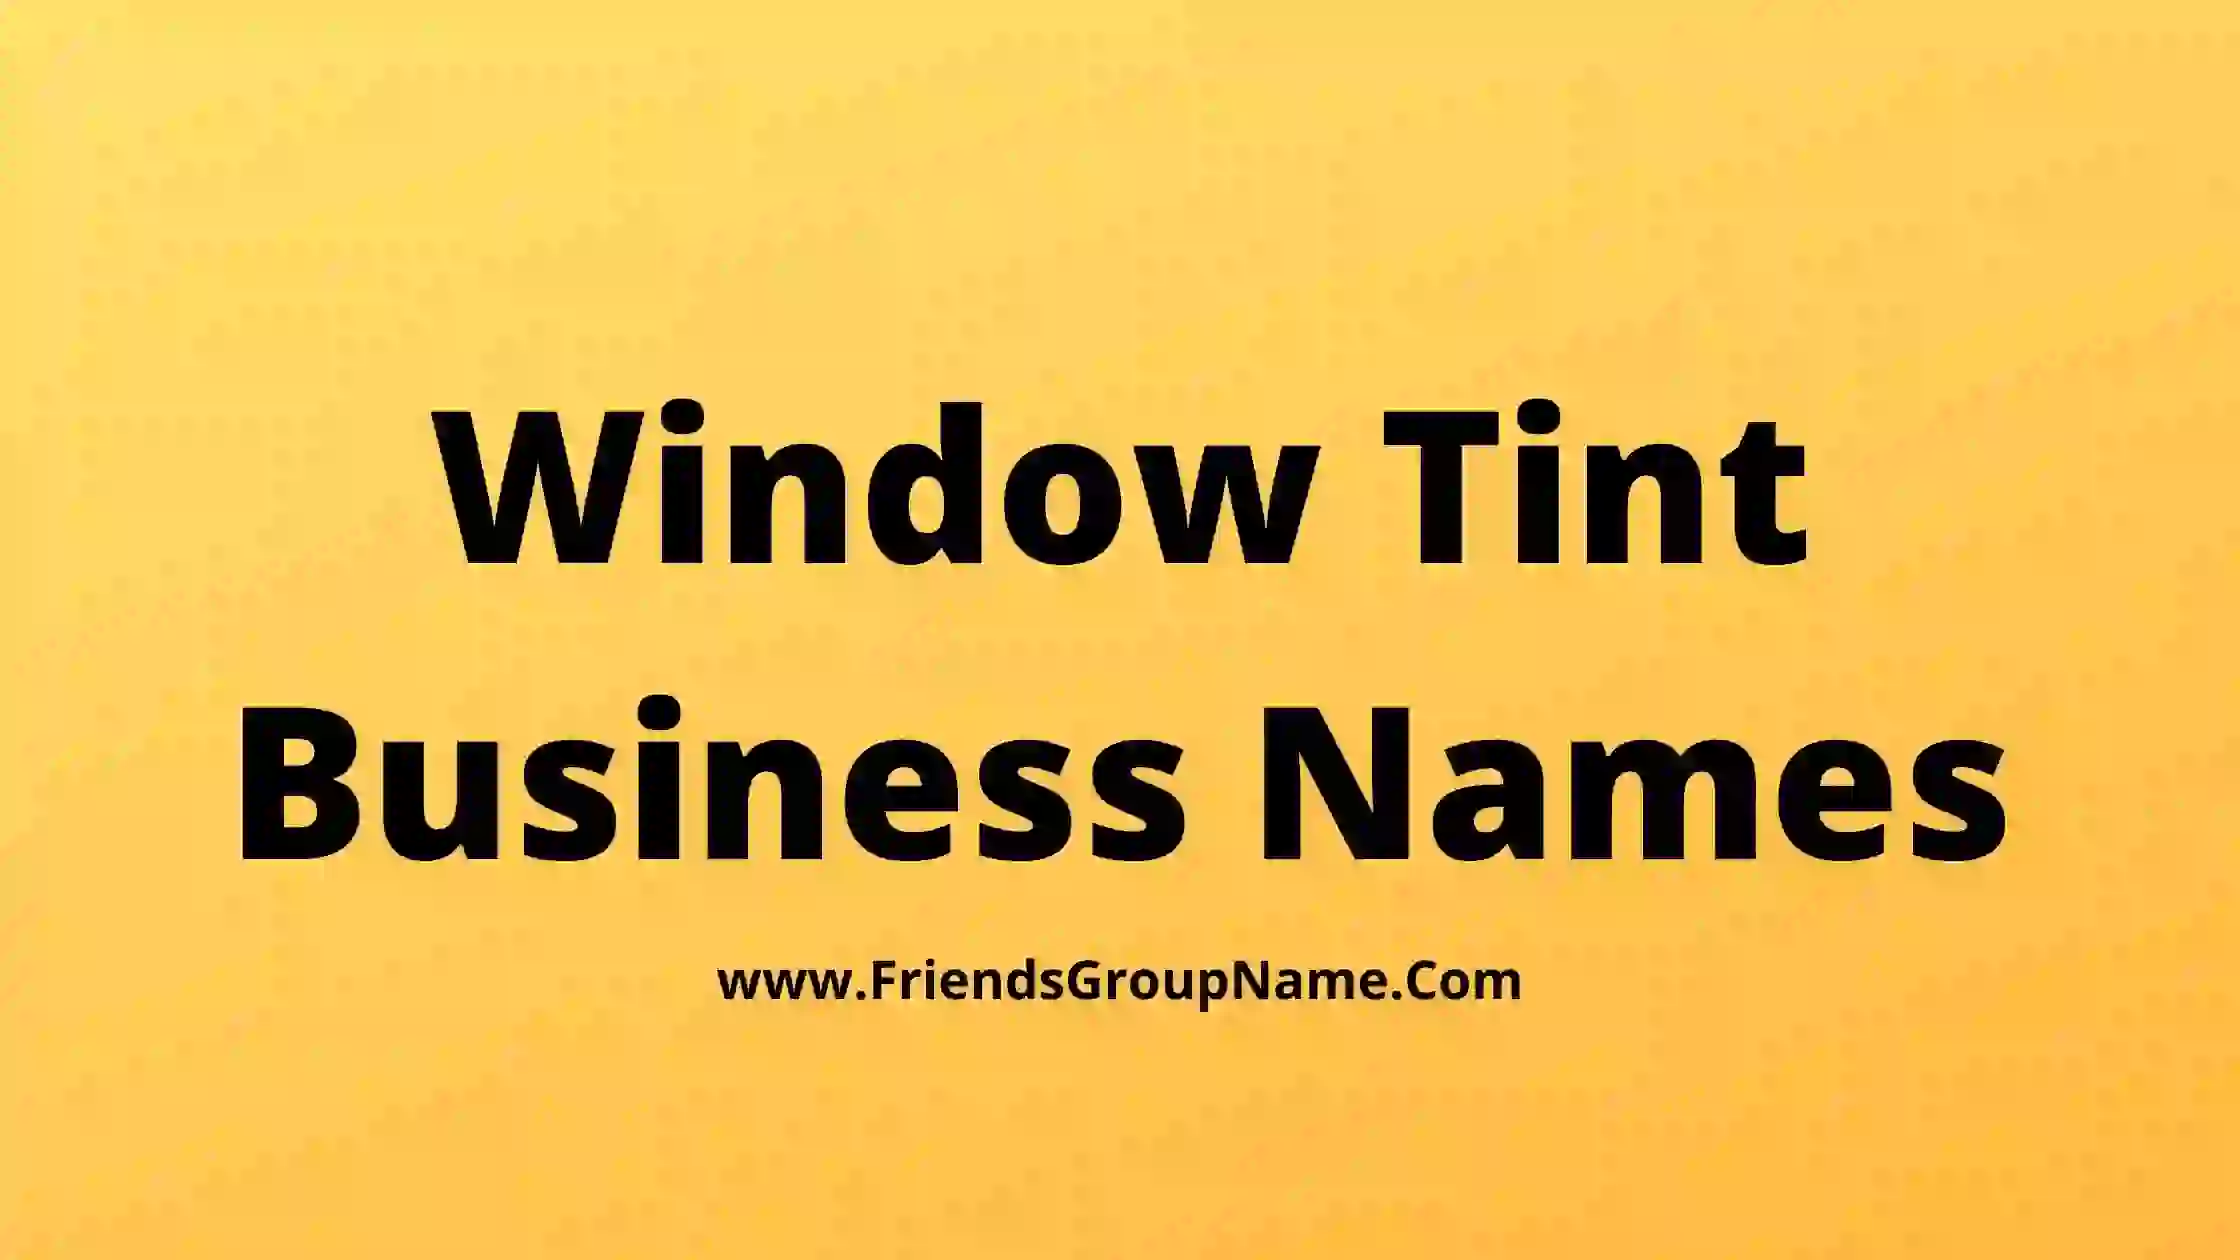 Window Tint Business Names